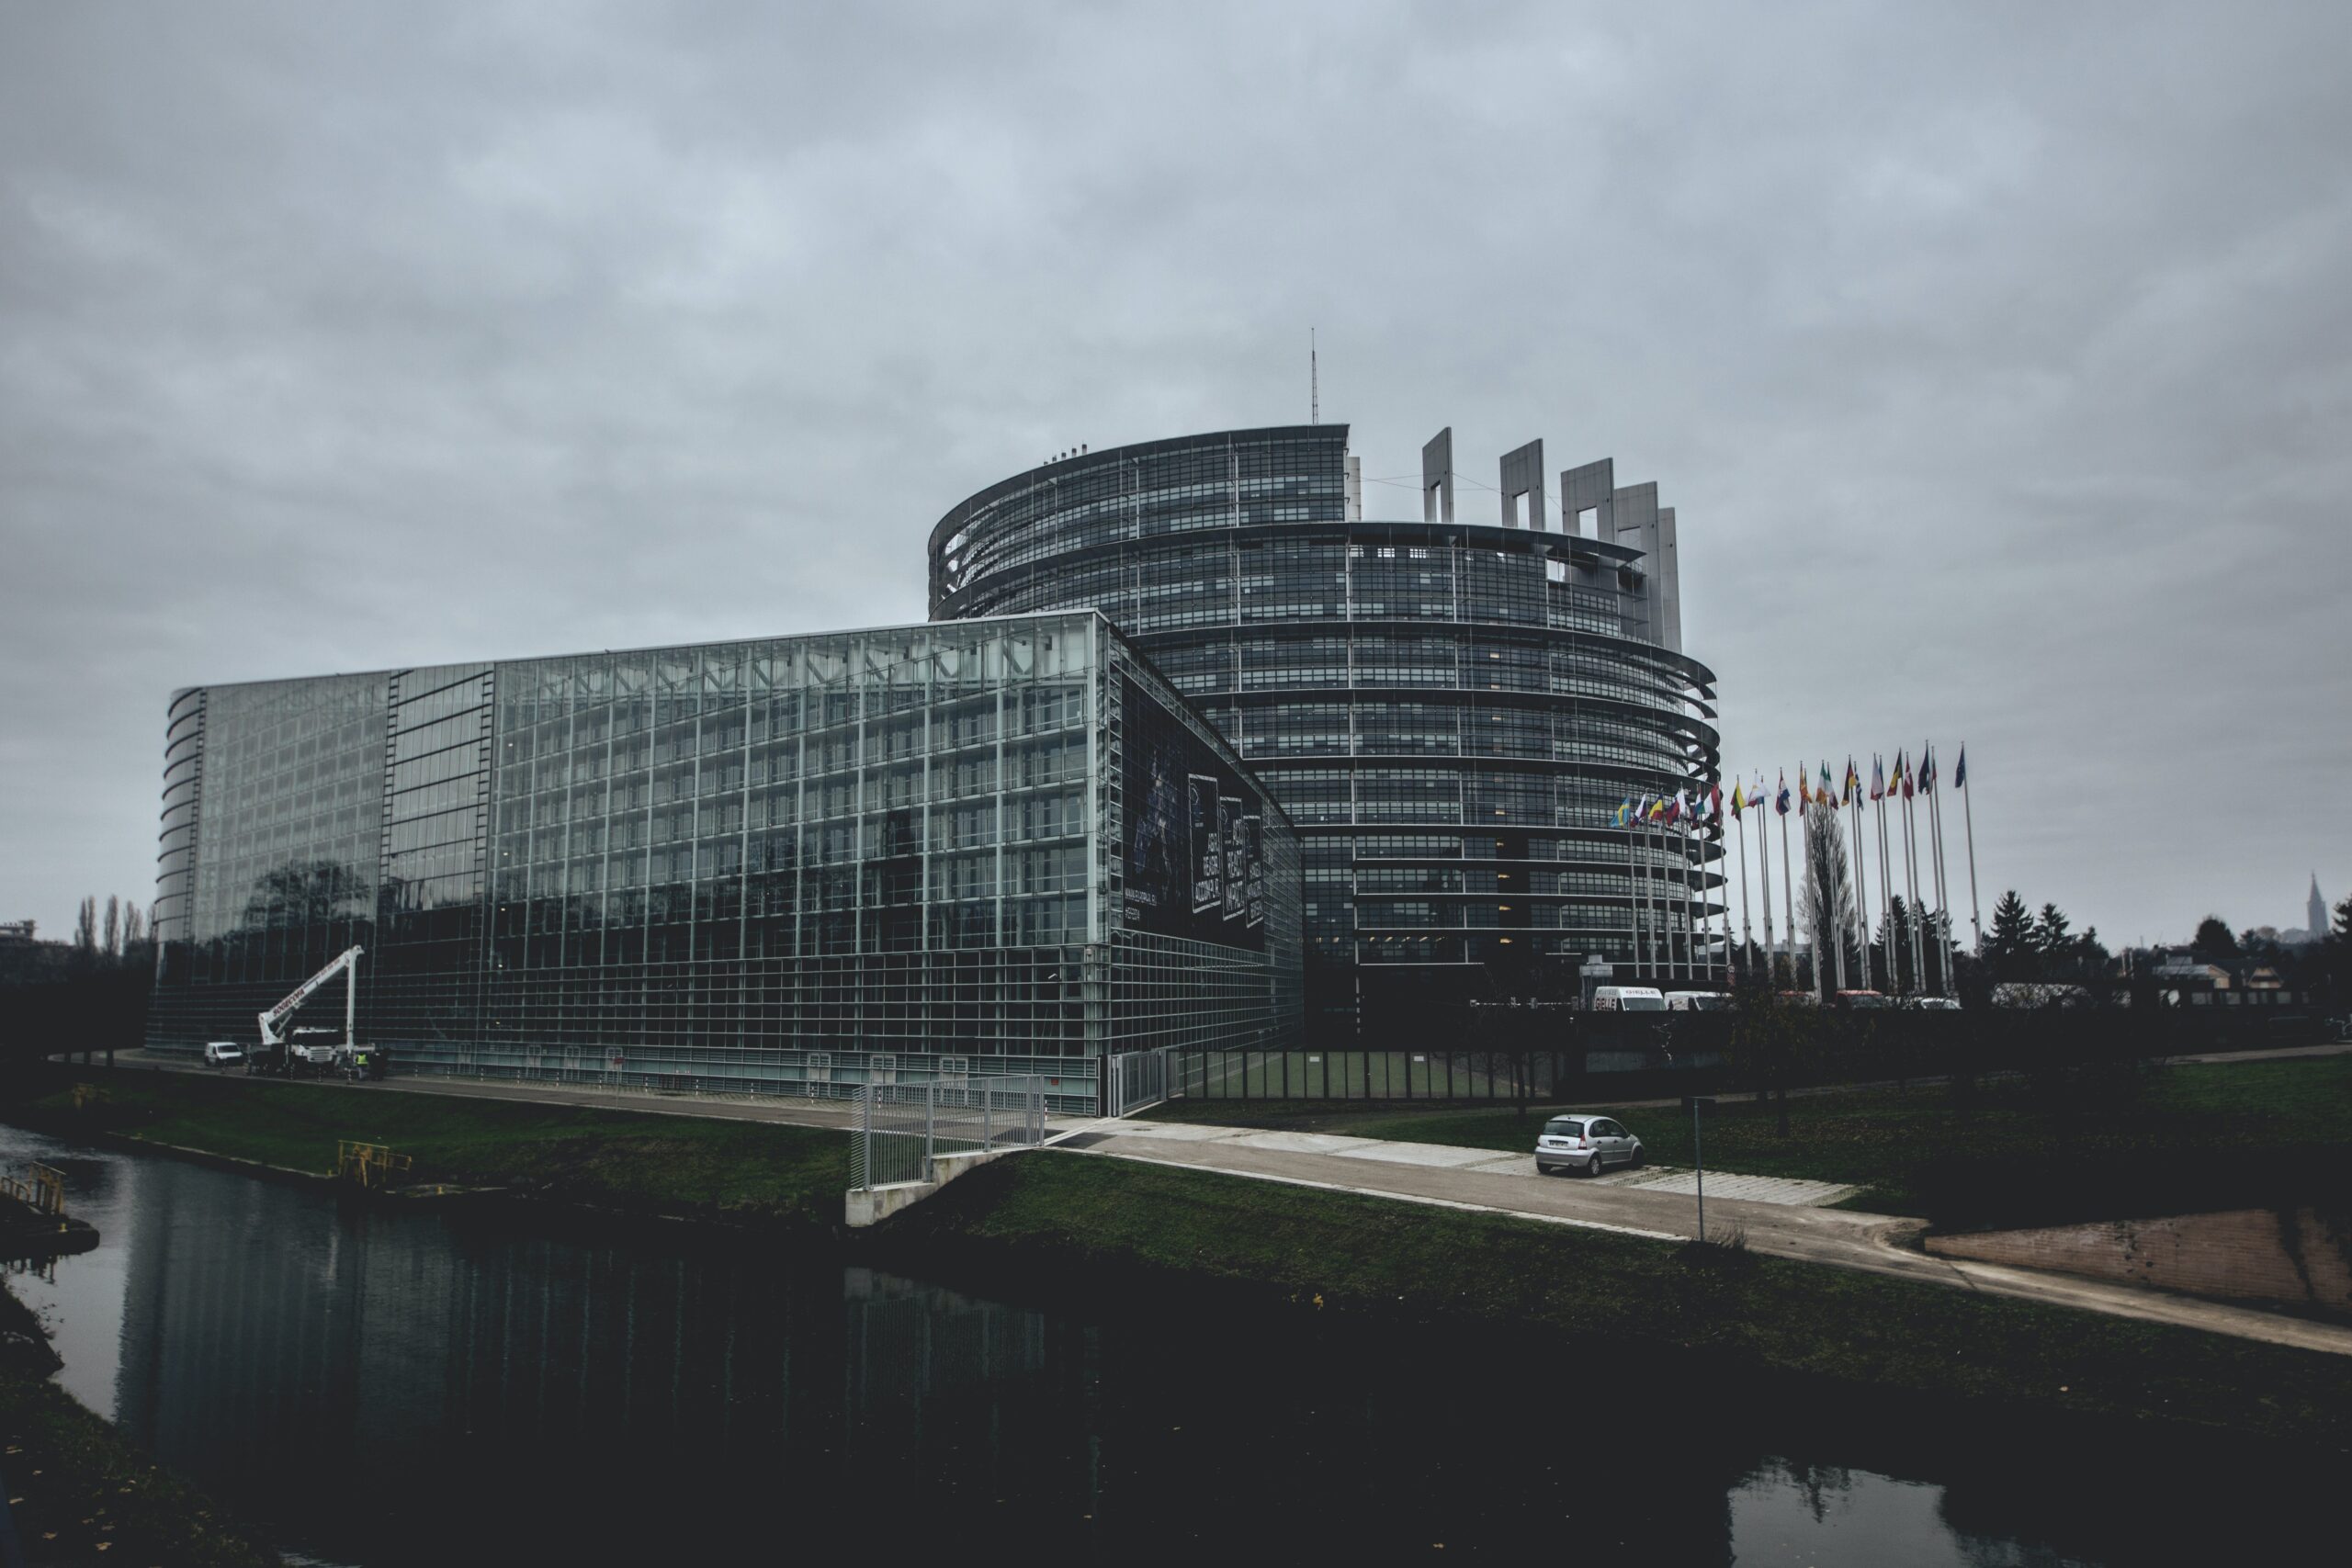 EU Commission’s Breakthrough Pact: More sustainable, repairable, and circular products?